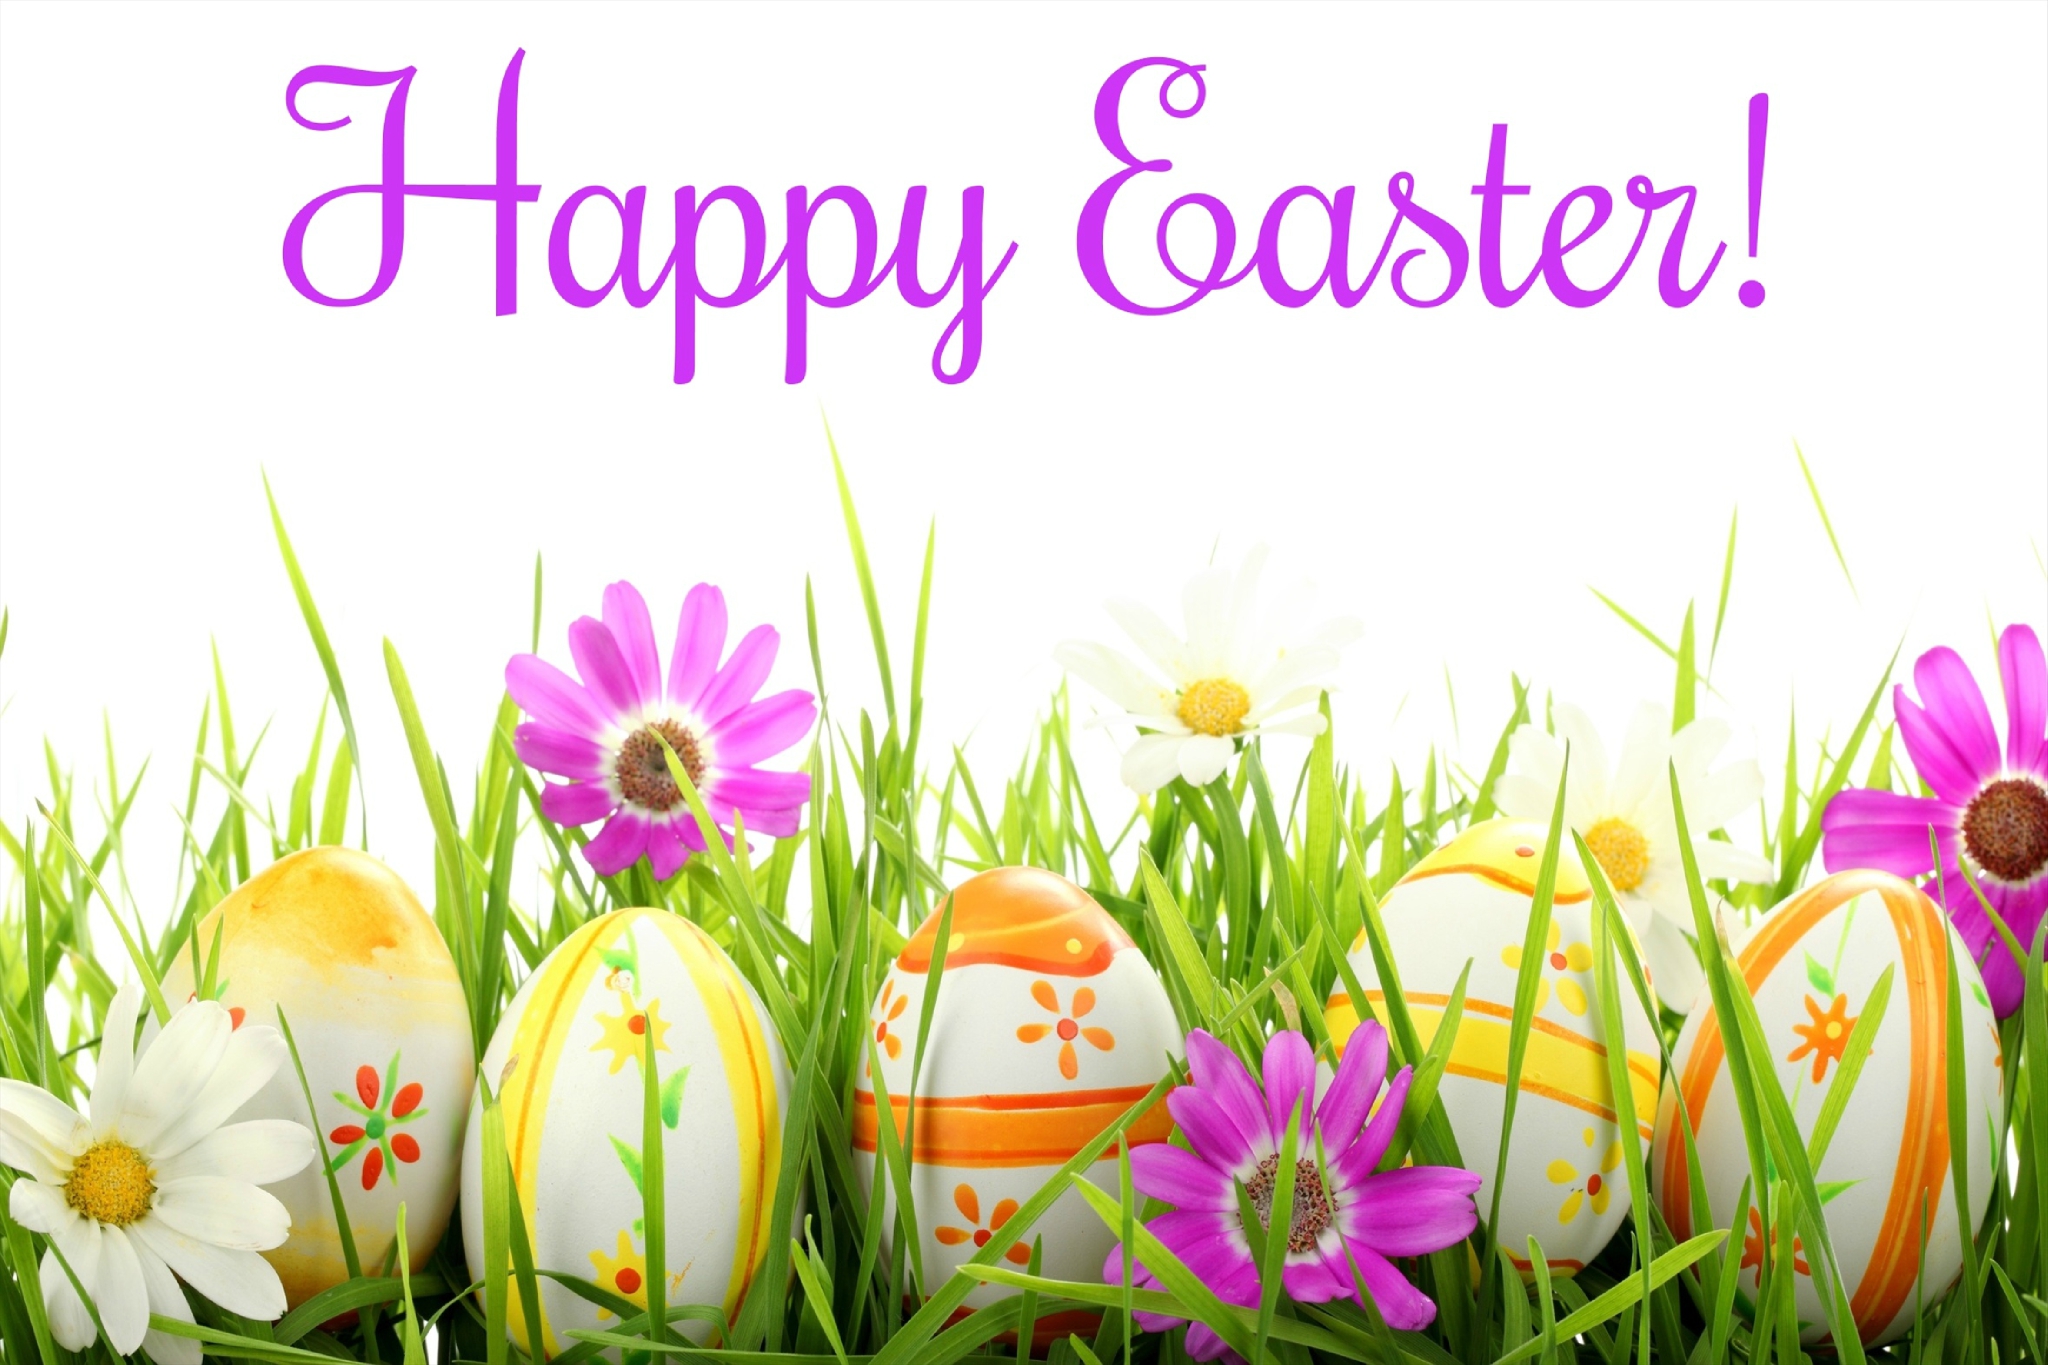 CLOSED -- Happy Easter!